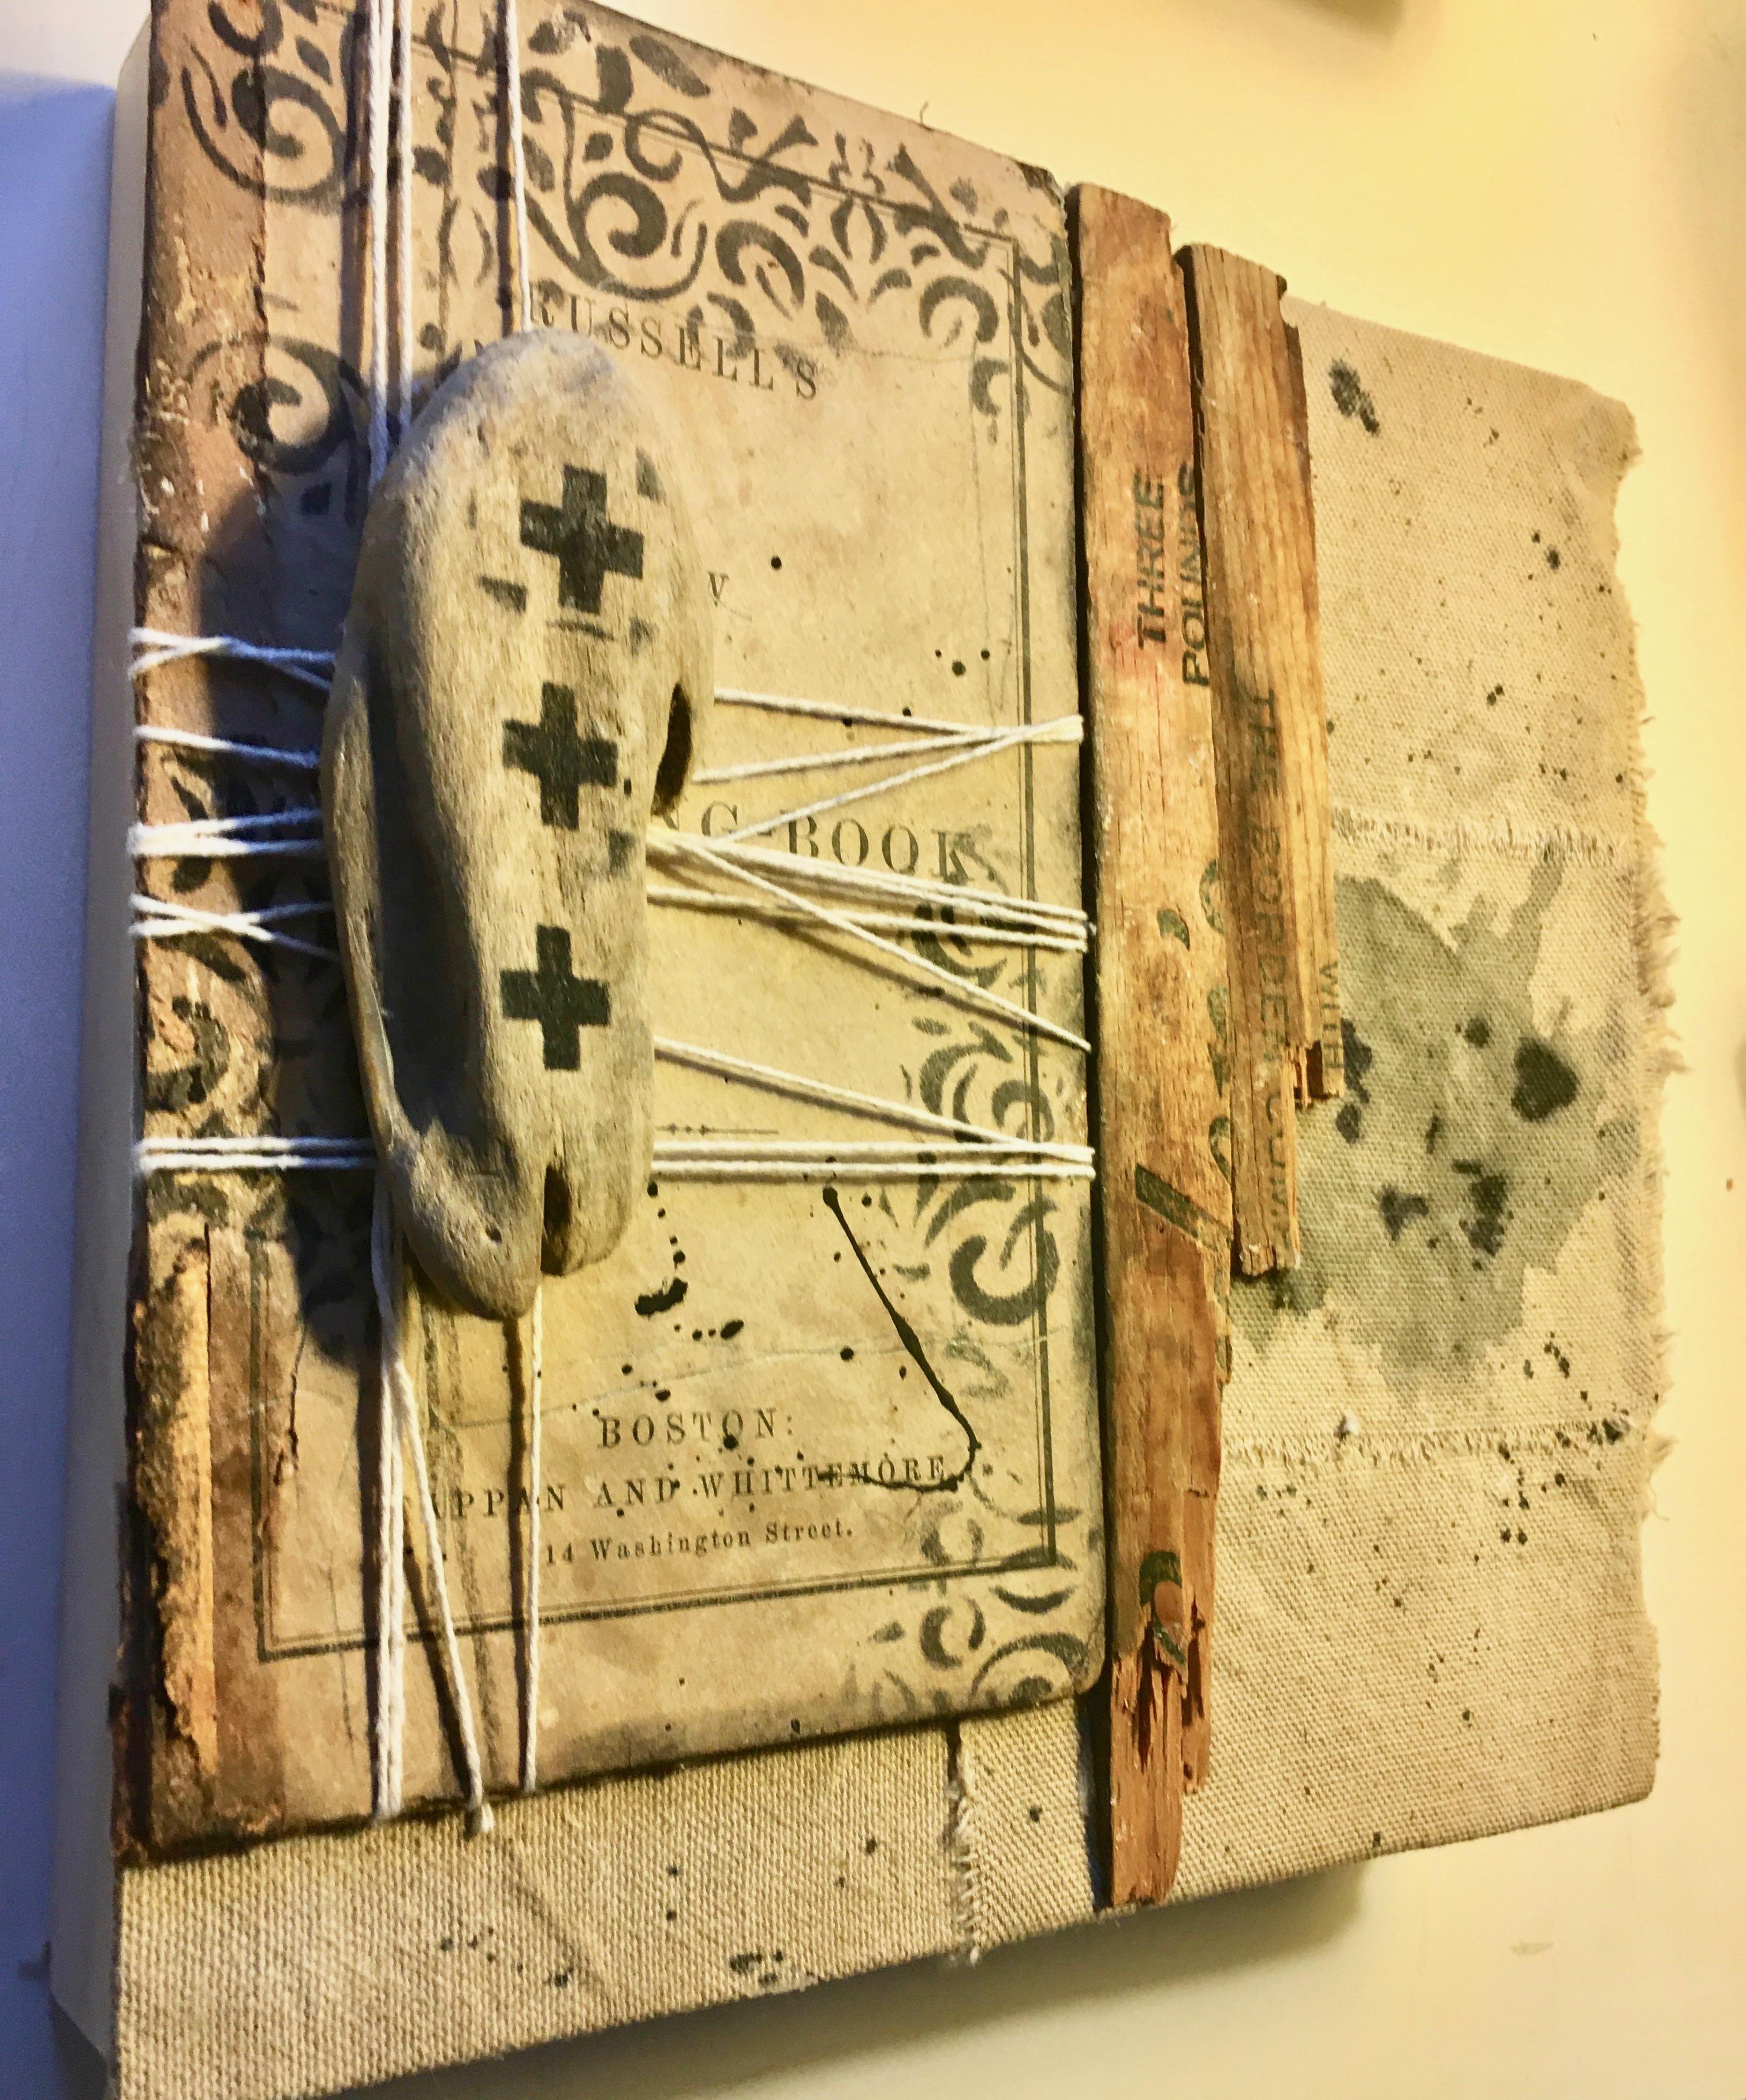 Contemporary work of art by Christine Graf.

A collage work of art created using wood, vintage book and canvas. Graf skillfully employs unconventional materials and everyday objects when creating her mesmerizing pieces. Her work is very tactile and